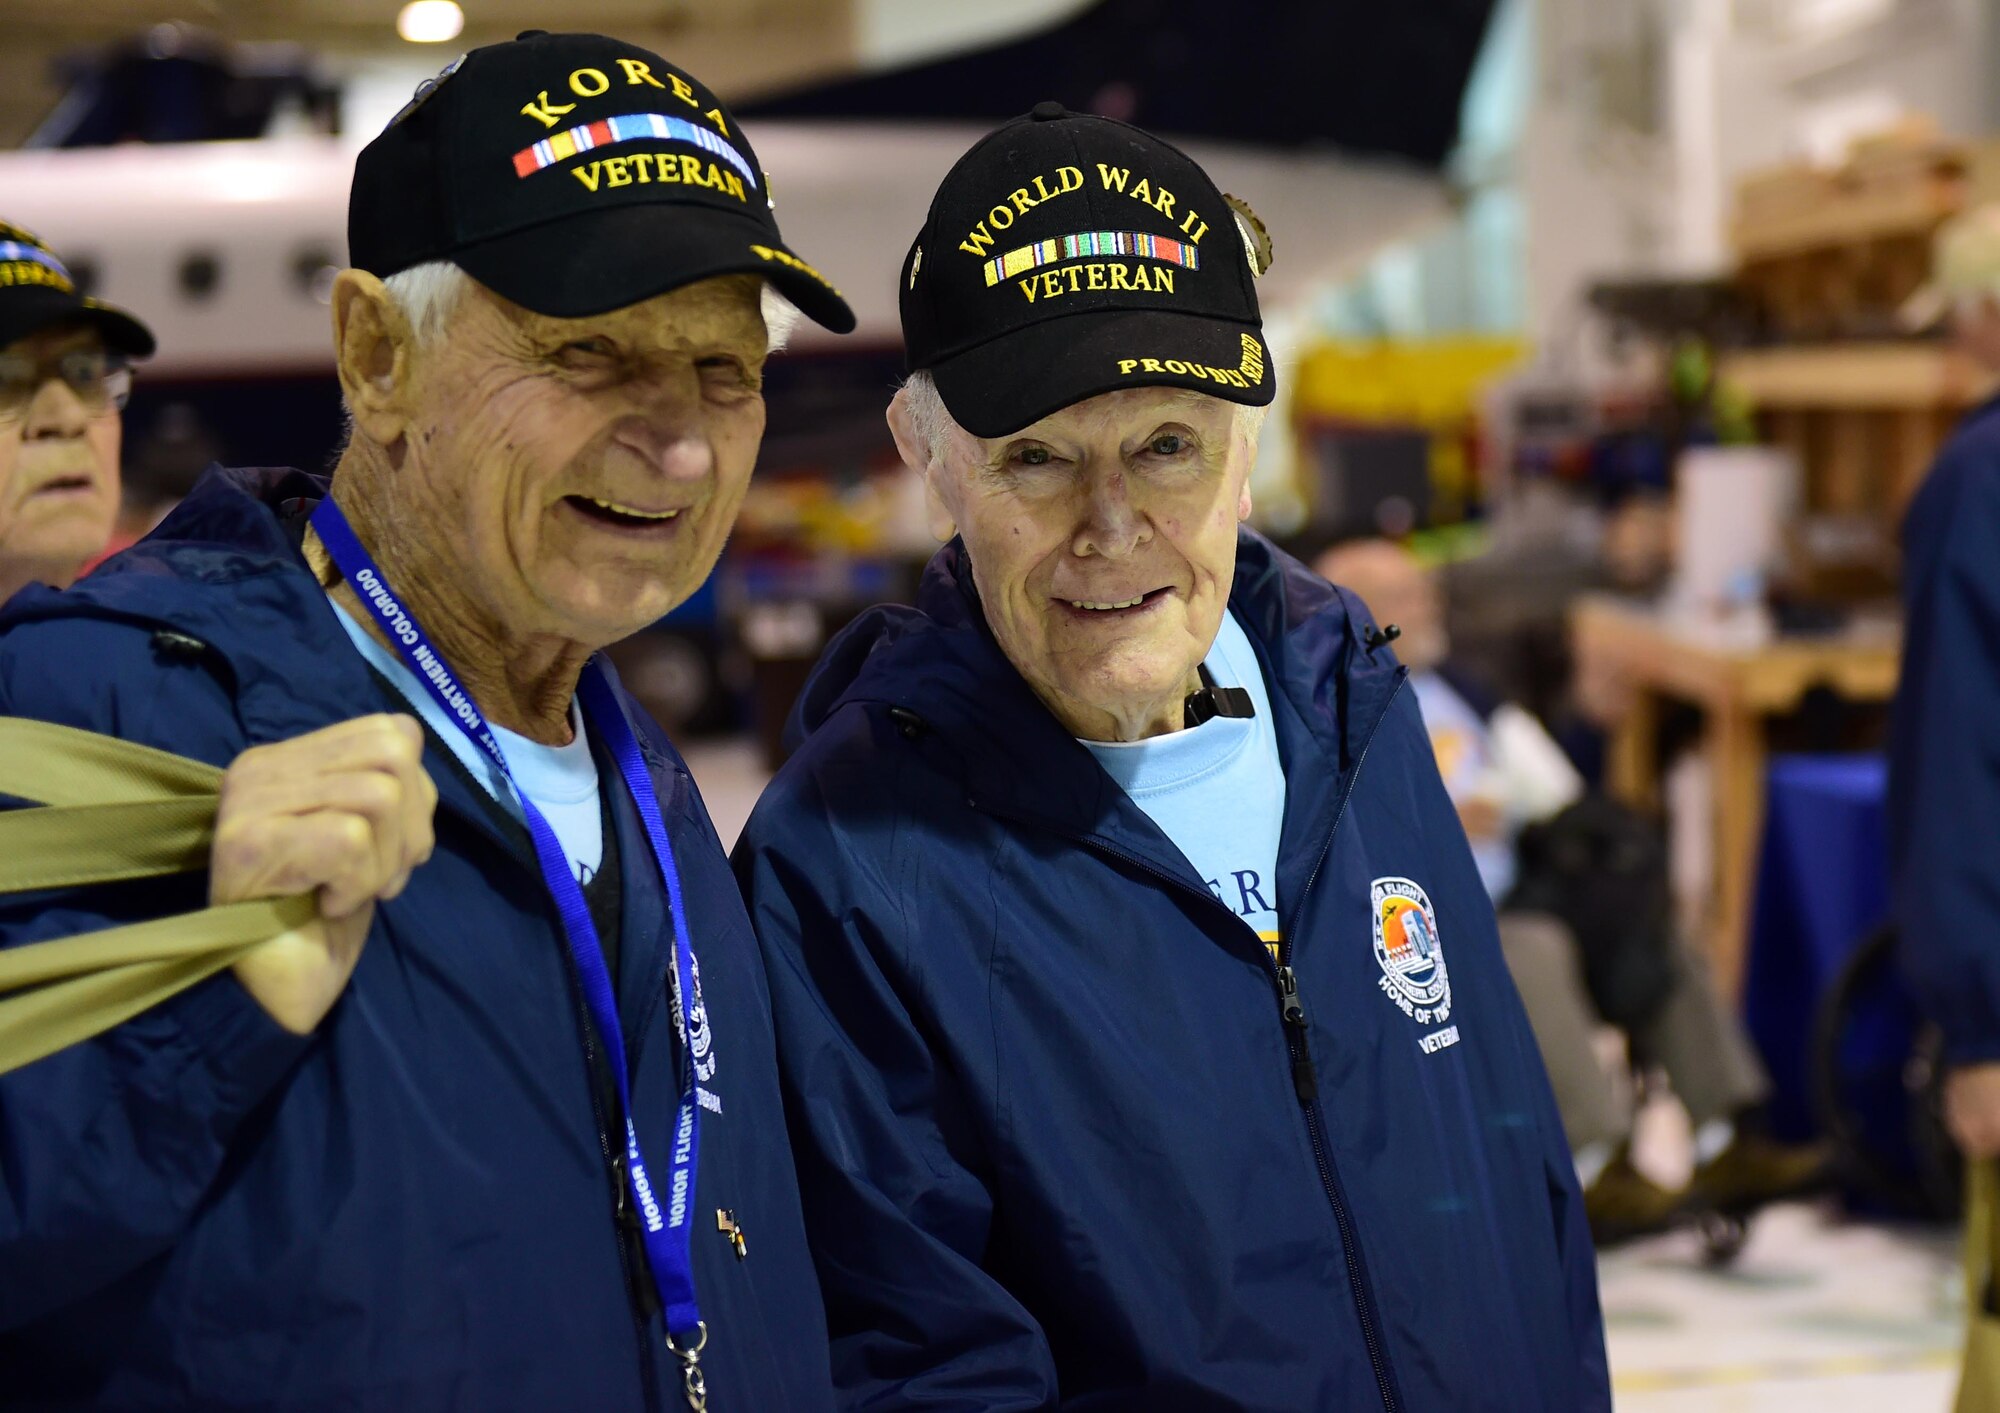 Approximately 120 veterans and their guardians returned from Washington D.C. May 2, 2016, at Signature Flight Support DEN. The Northern Colorado Honor Flight program is a non-profit organization created to honor America’s veterans for all their sacrifices by providing a flight to the nation’s capital to tour various monuments. (U.S. Air Force photo by Airman 1st Class Gabrielle Spradling/Released)